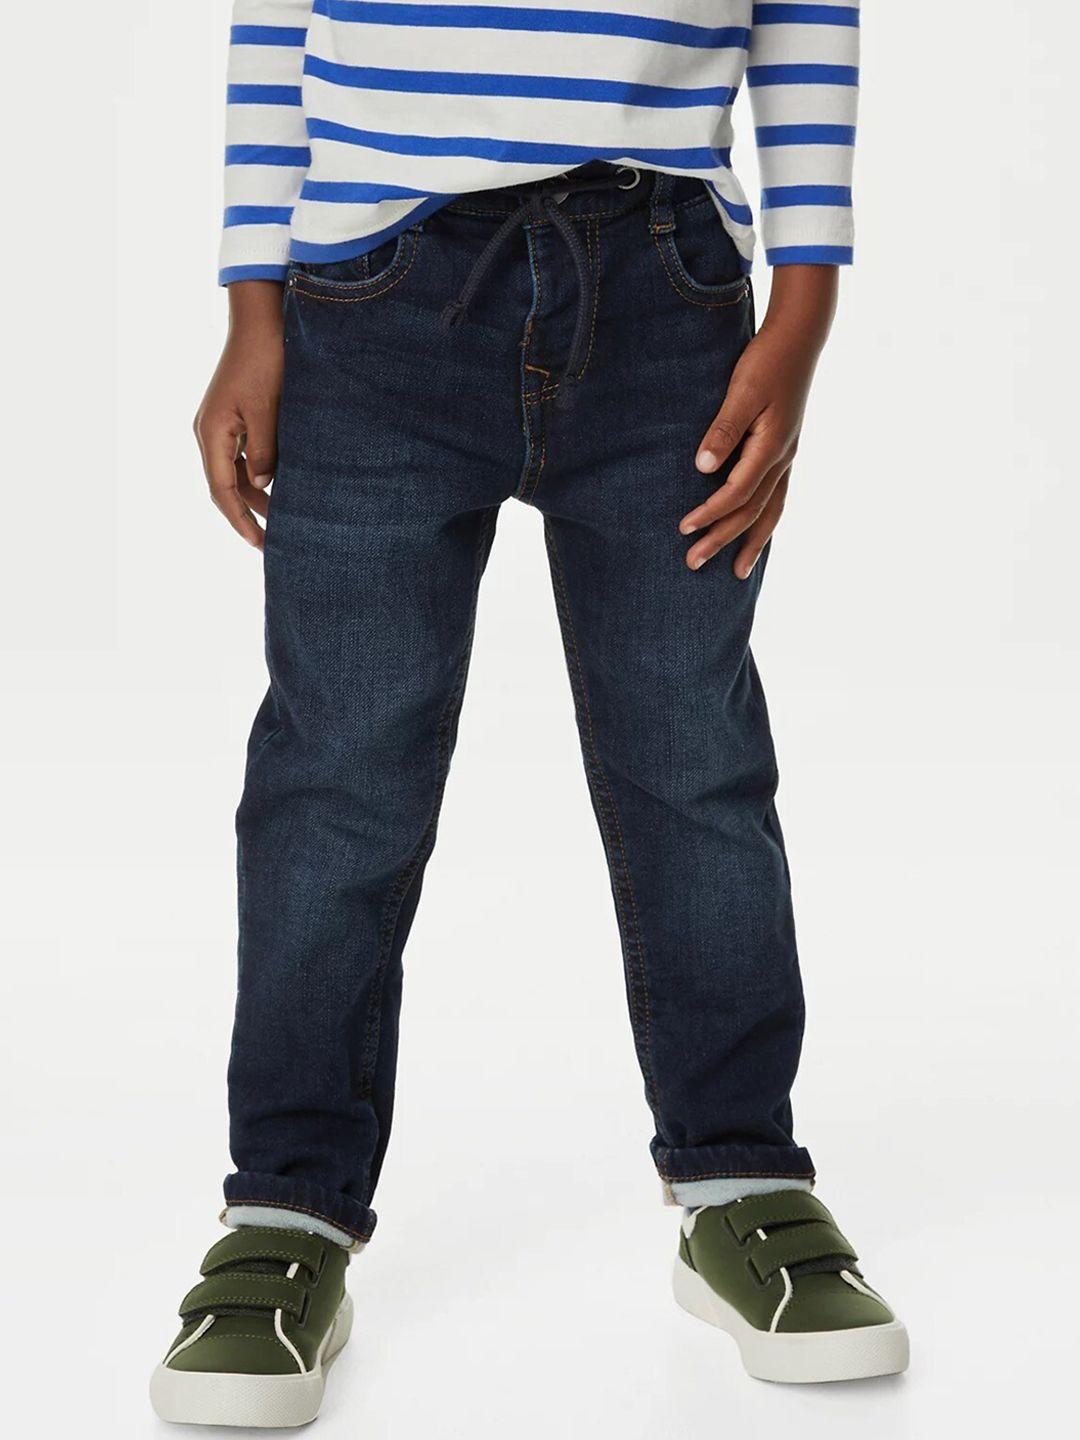 marks & spencer boys mid-rise dark shade light fade clean look stretchable jeans